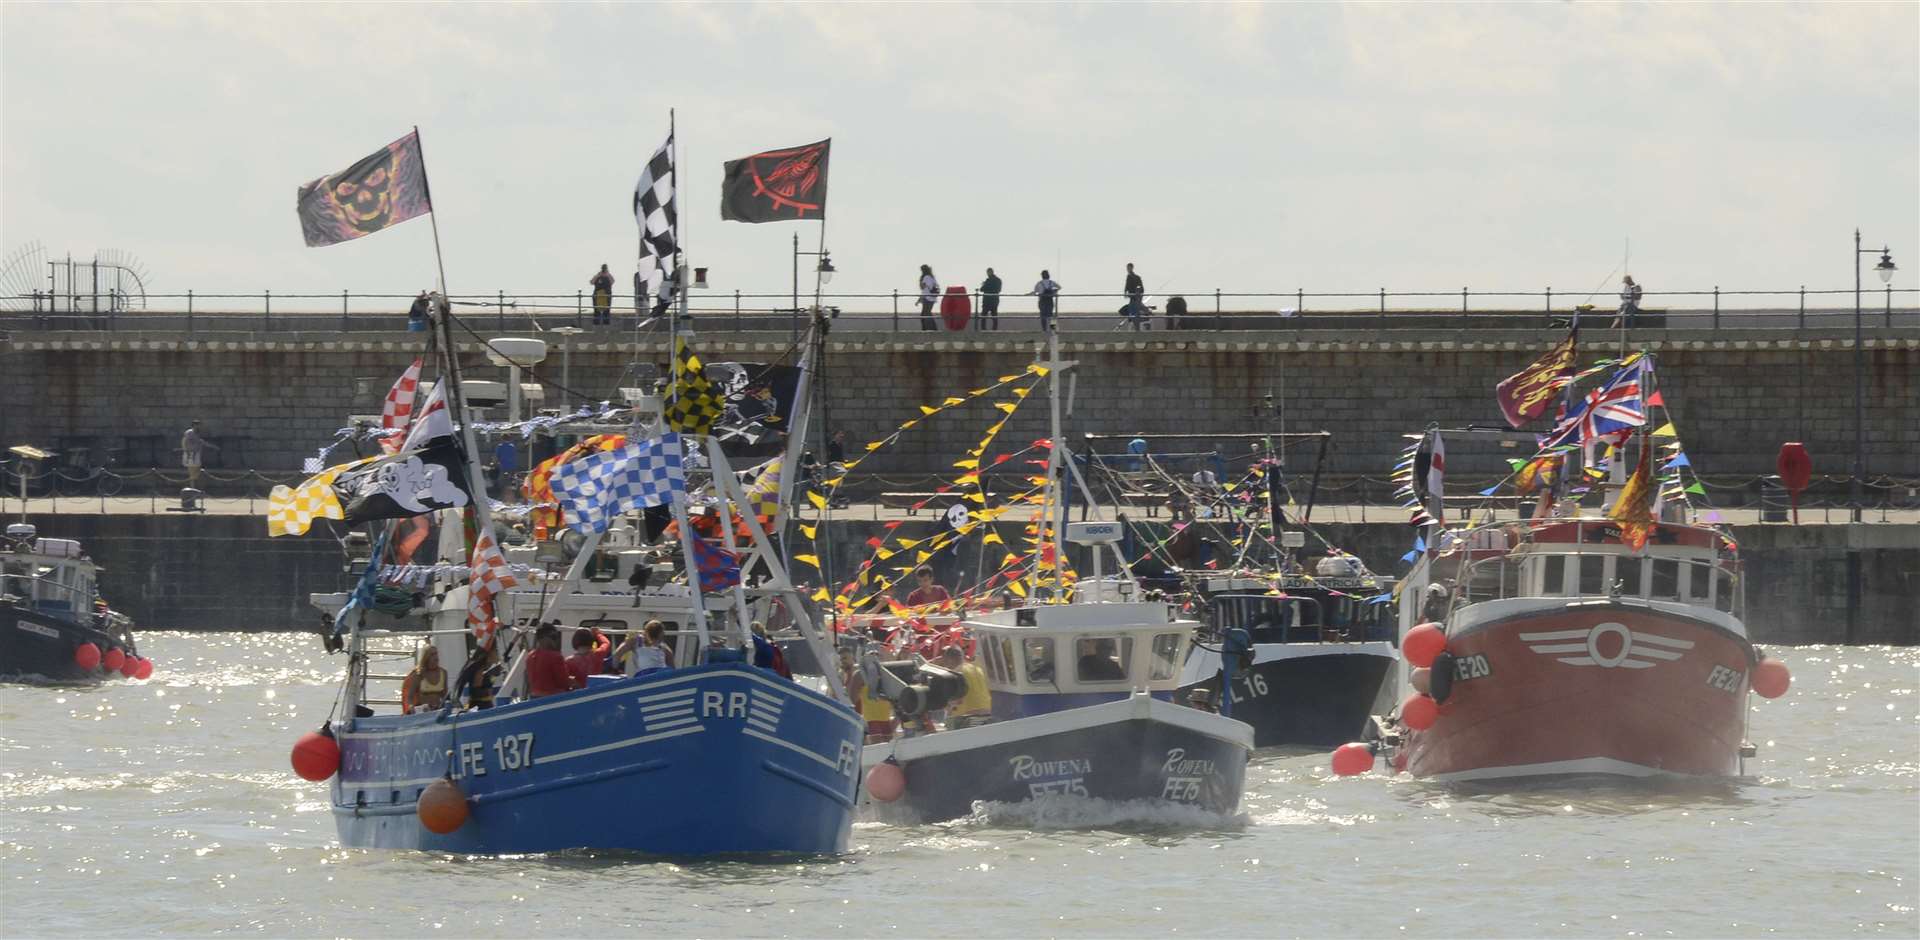 Folkestone Trawler Race will take to the water Picture: Paul Amos